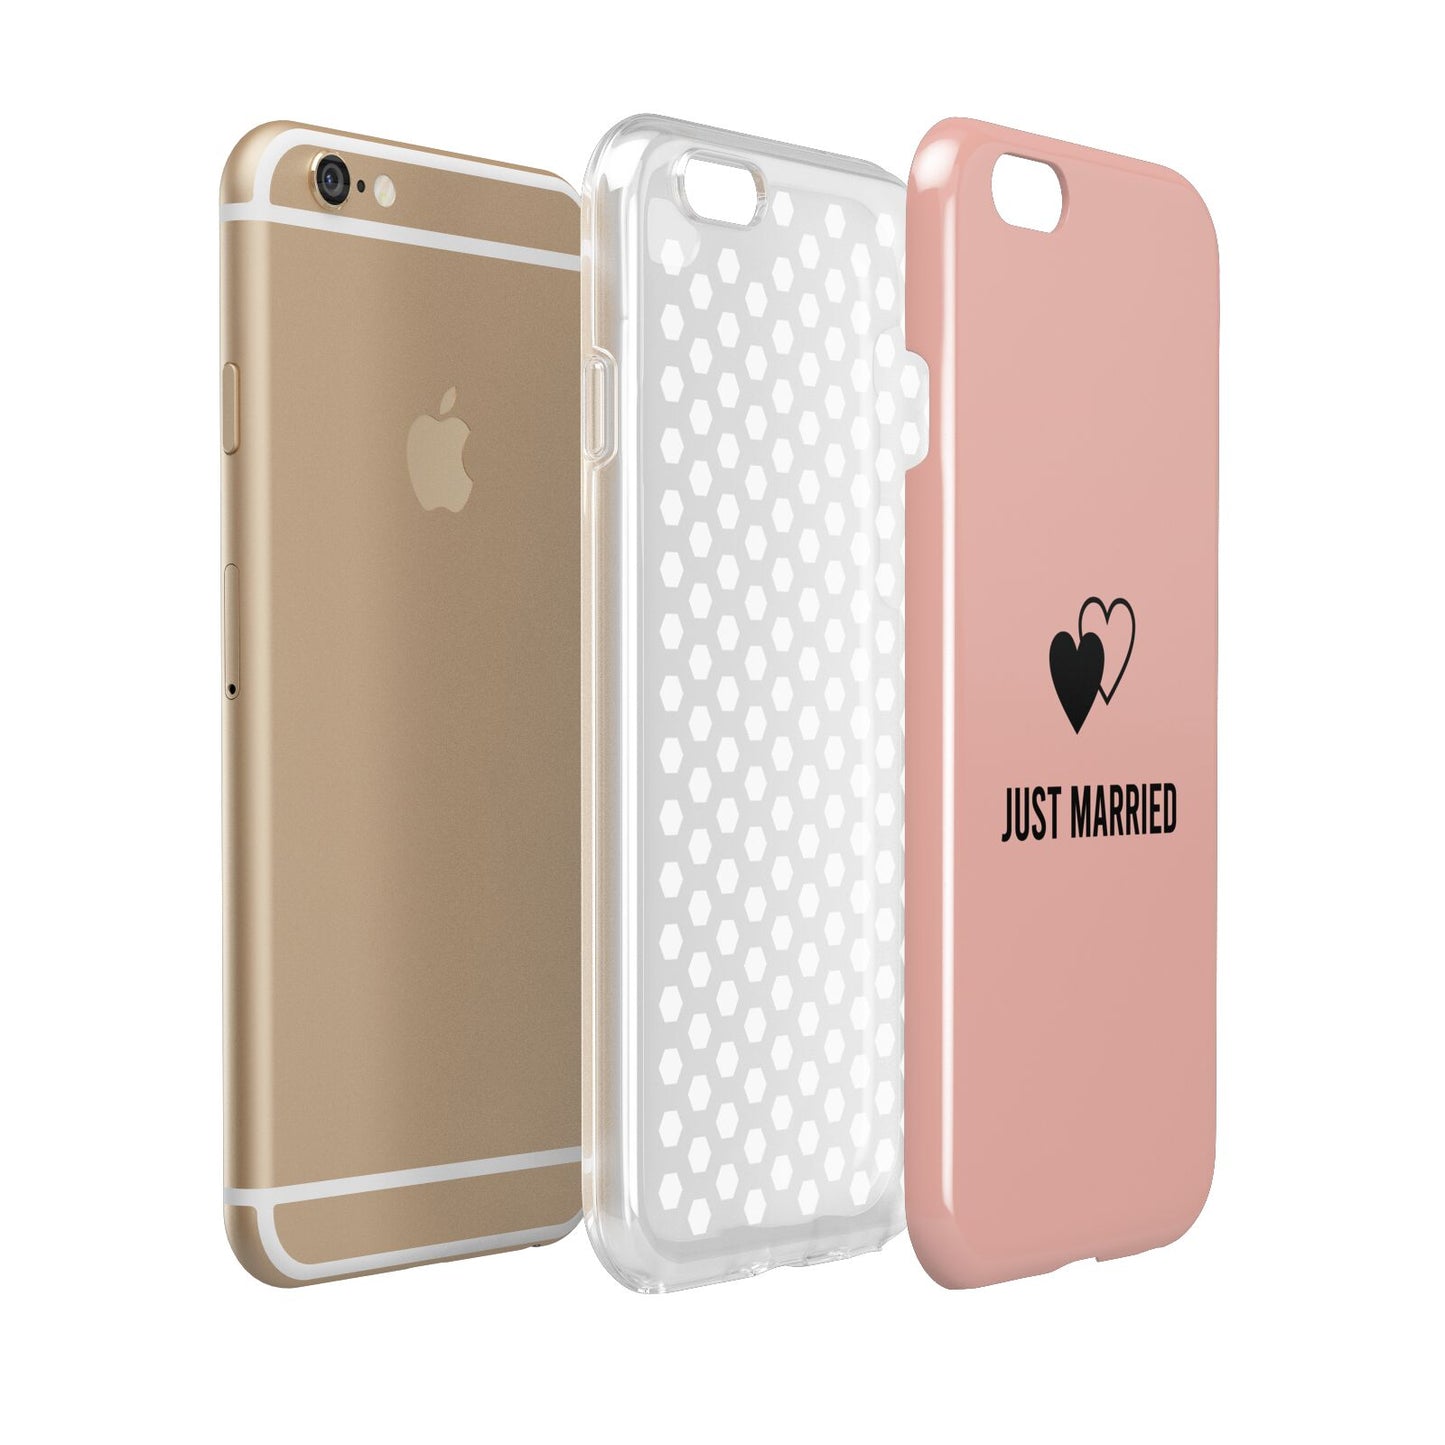 Just Married Apple iPhone 6 3D Tough Case Expanded view